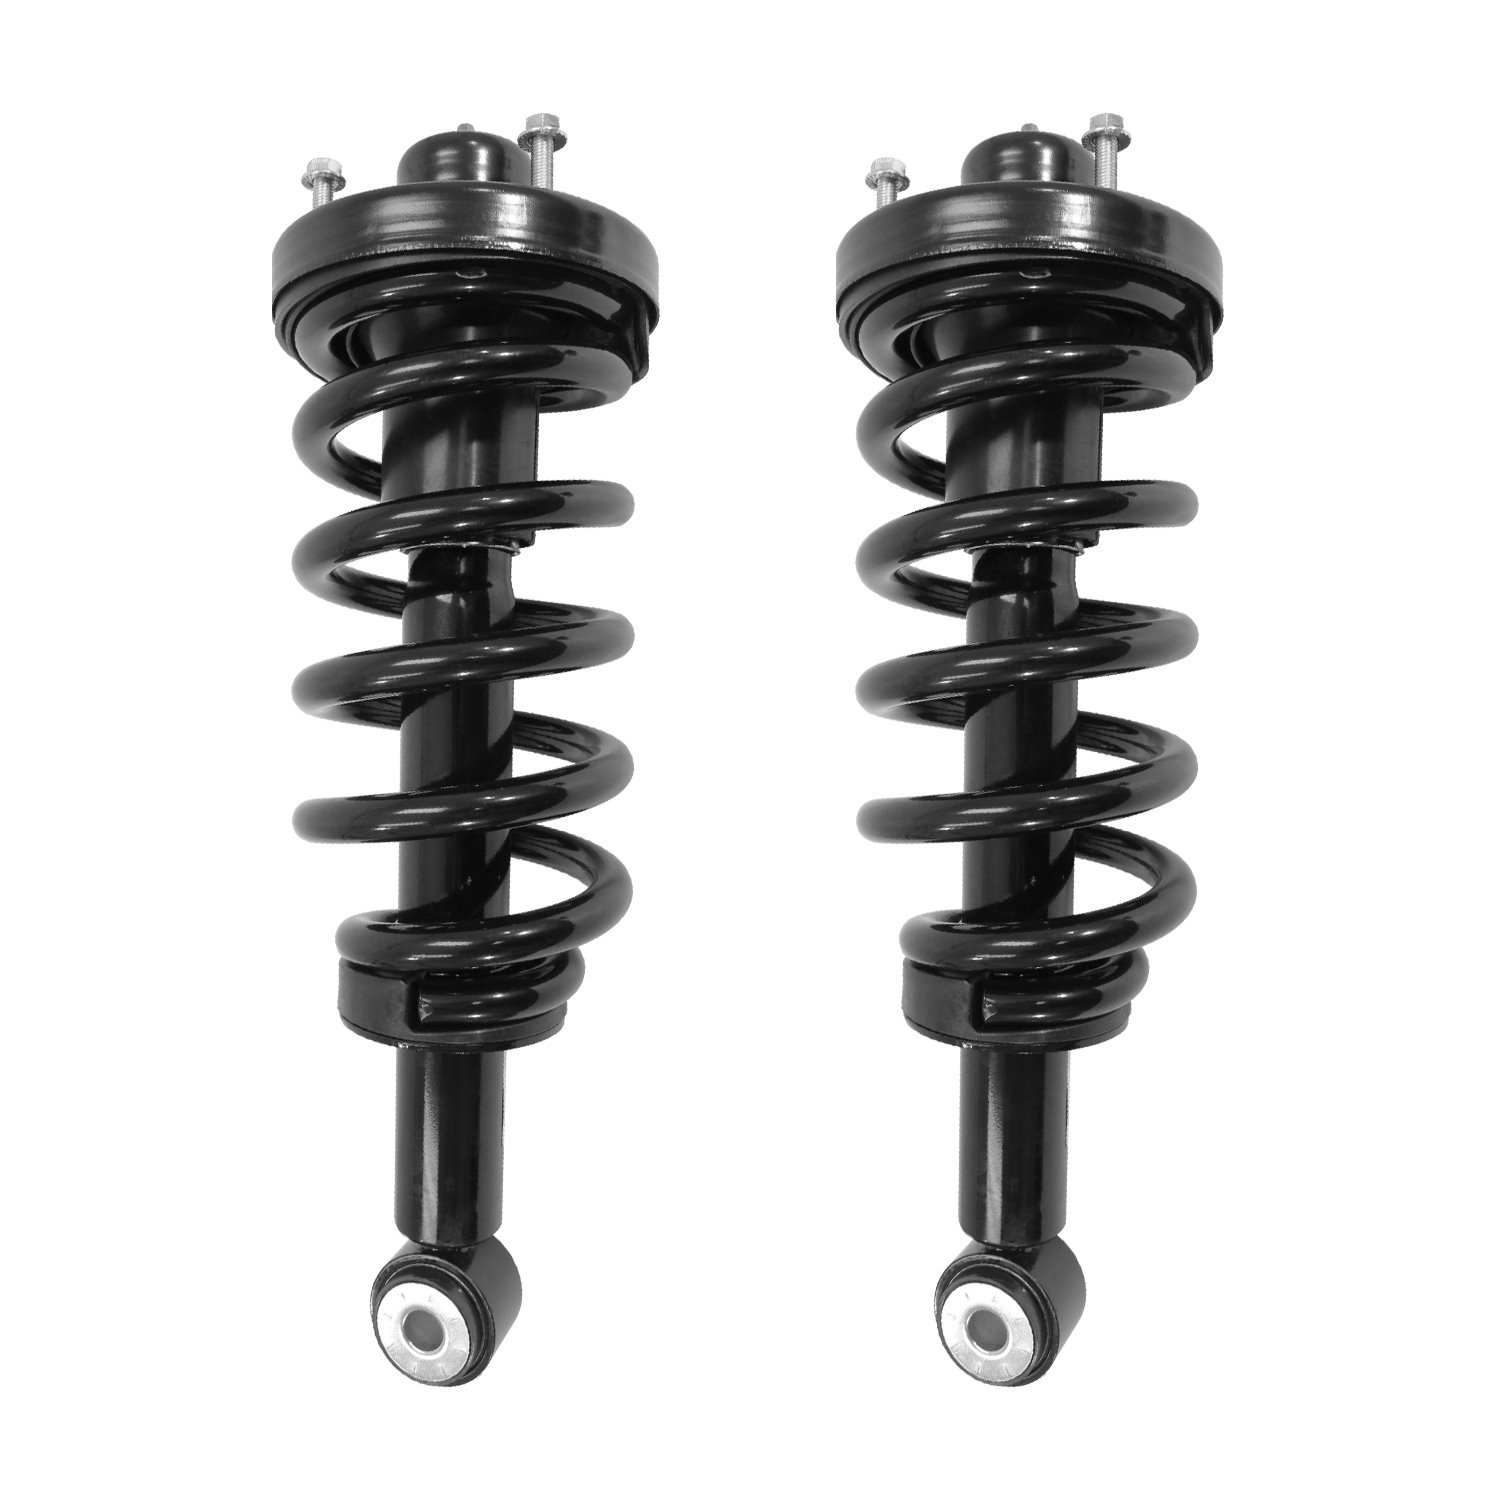 2-16030-001 Suspension Strut & Coil Spring Assembly Set Fits Select Ford Expedition, Lincoln Navigator